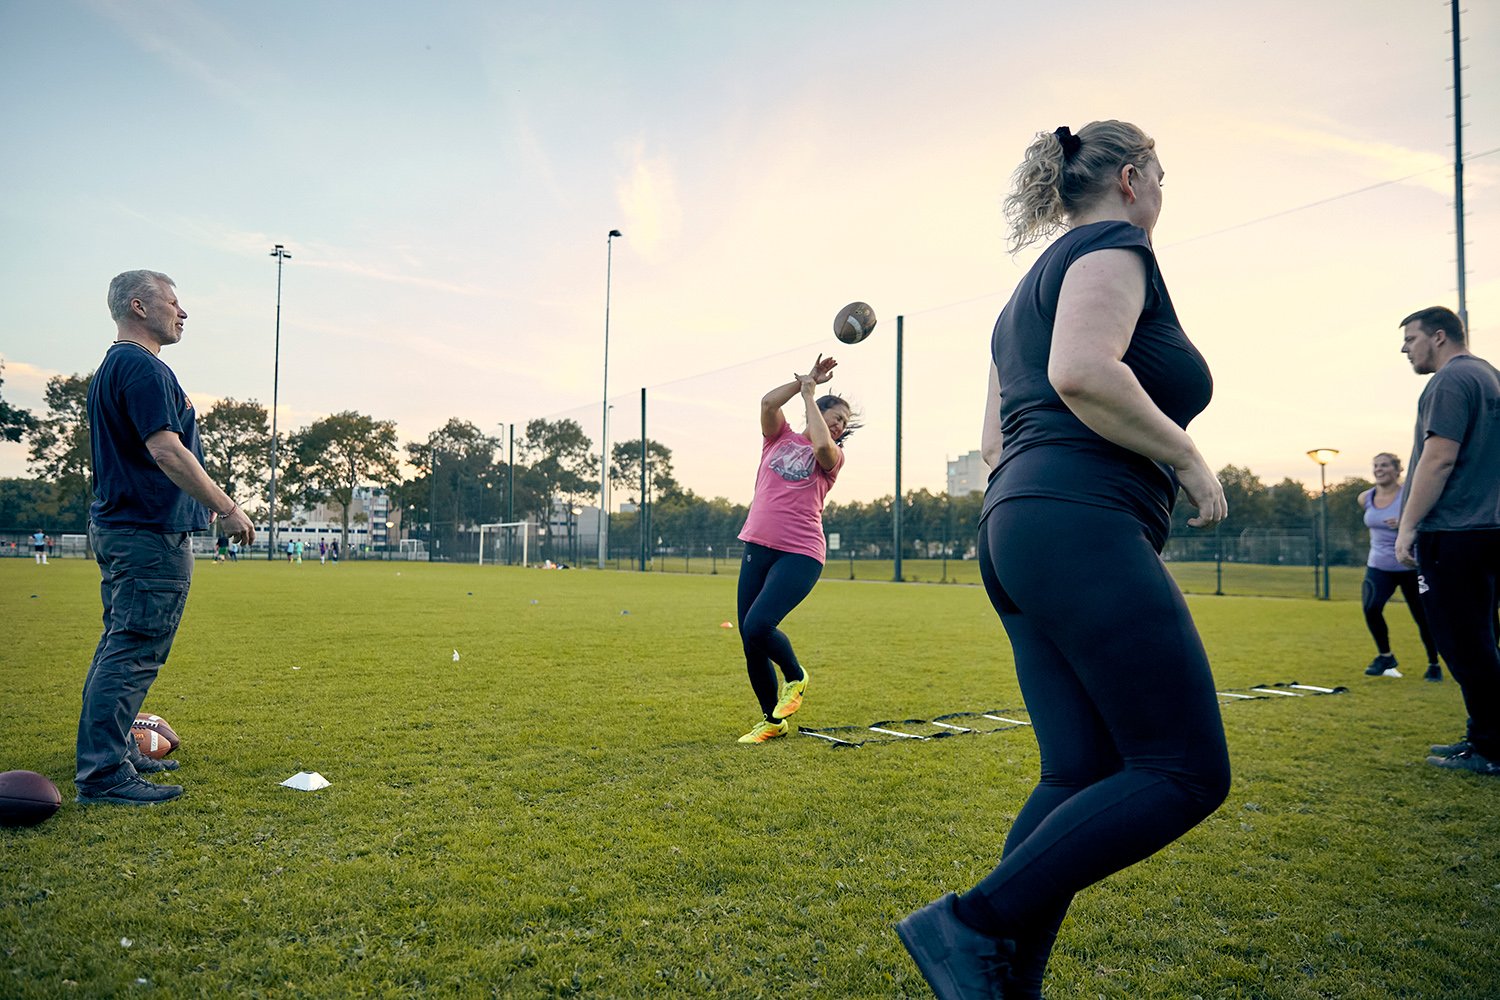  Head coach Arrien (left) tests the skills of Valkyries hopefuls during their first ever training session. Levina, the woman in the pink shirt, eventually made the team as a linebacker. She is still there. Eindhoven, NL, 2020. 